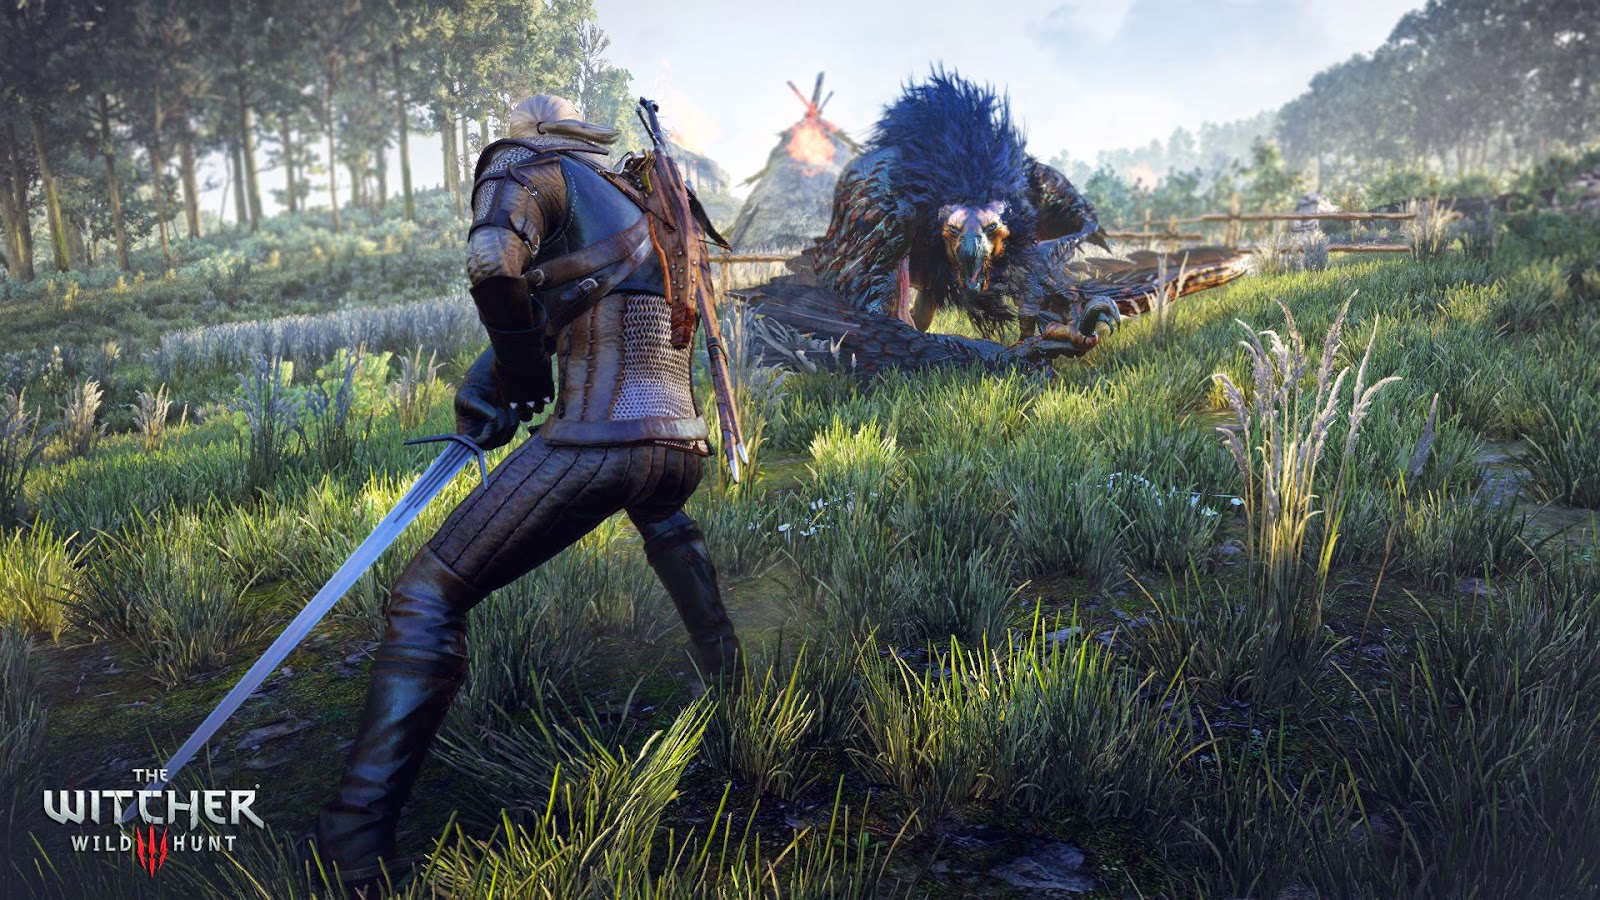 Game para PS4 The Witcher 3 Wild Hunt - Teek